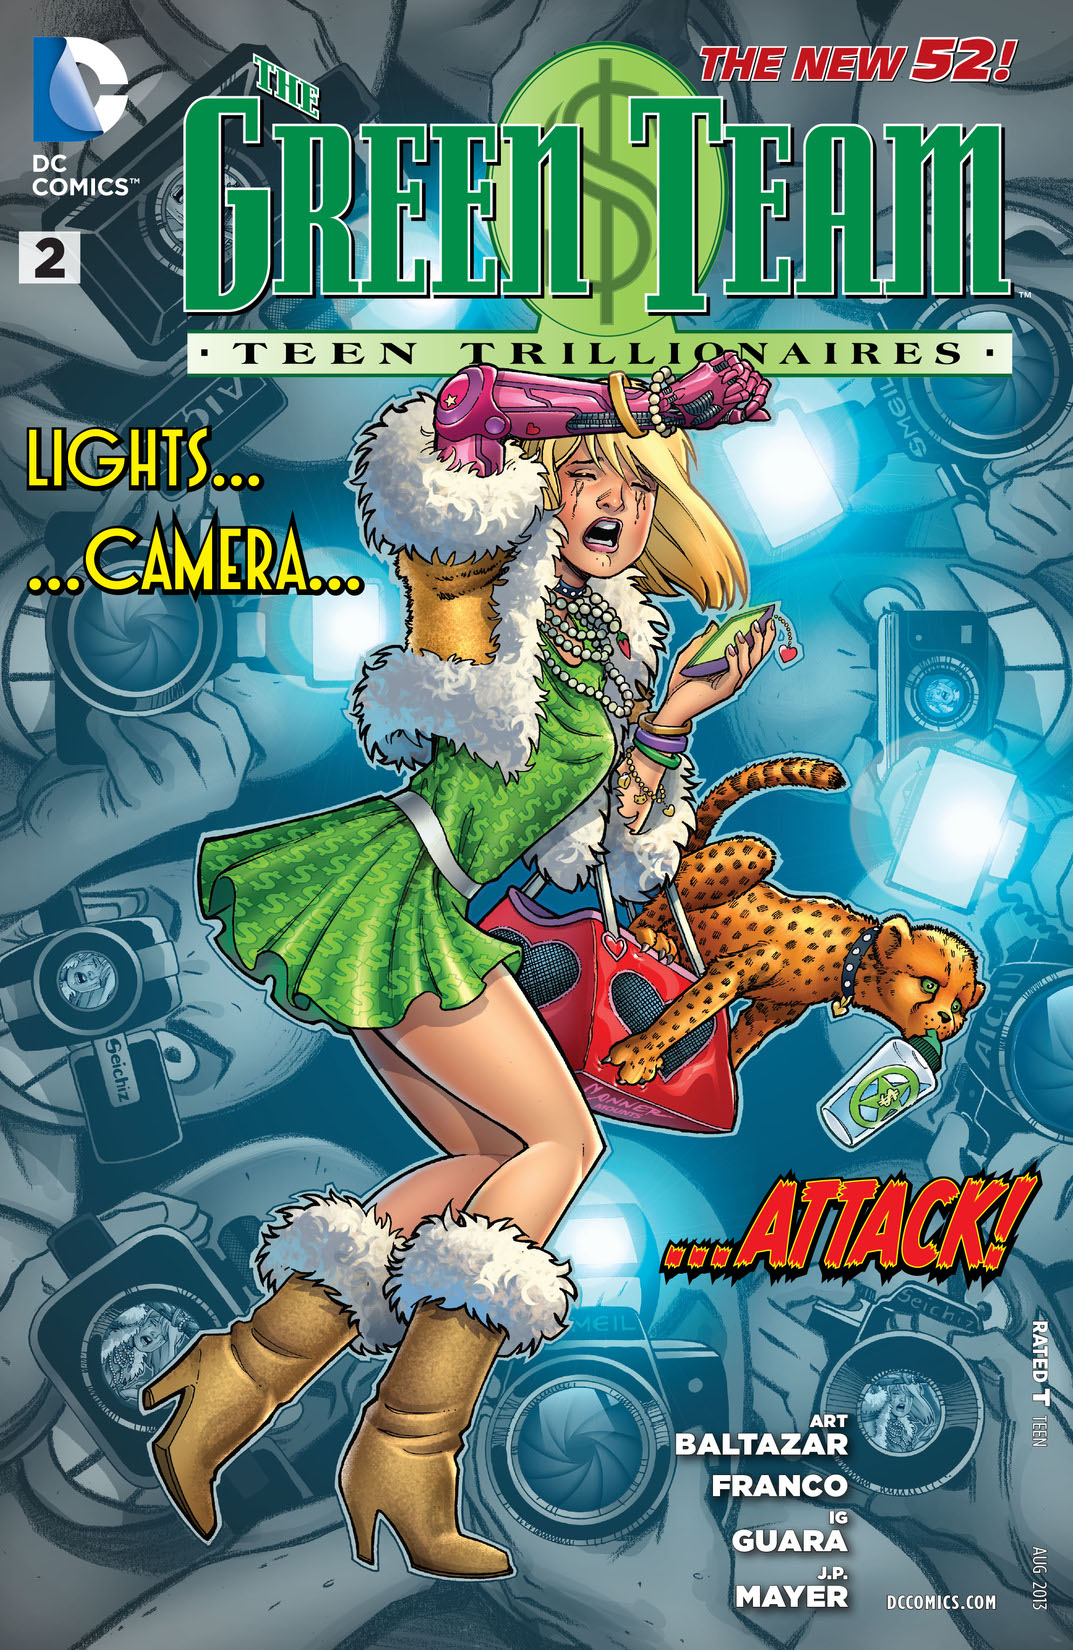 The Green Team: Teen Trillionaires (2013-) #2 preview images